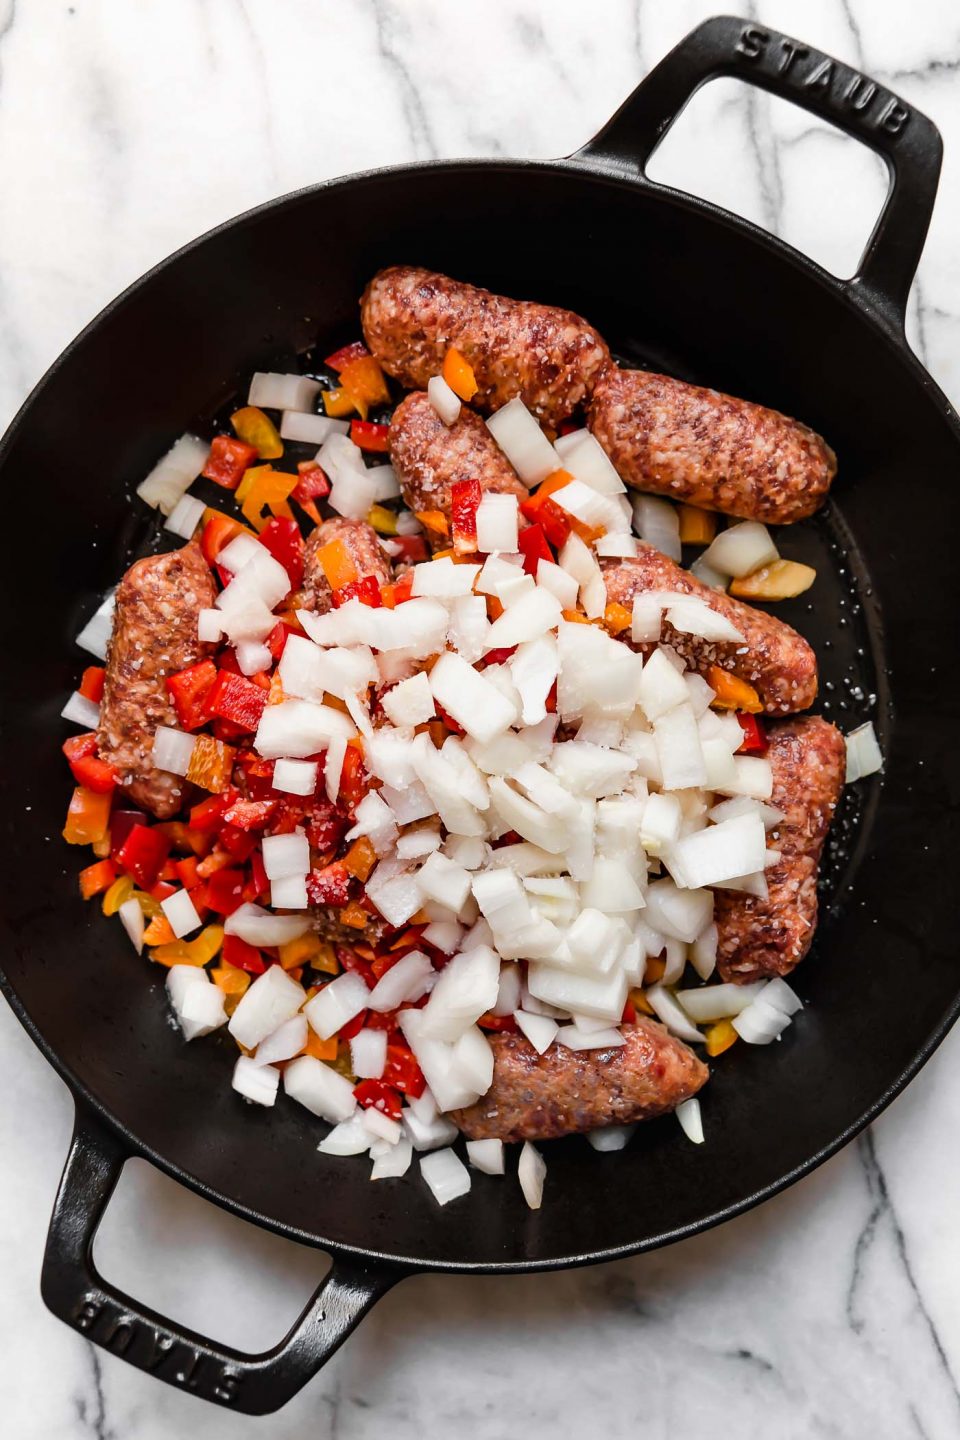 Step 1 of making sausage peppers pasta: Browning sausage, bell peppers & onions in large skillet.